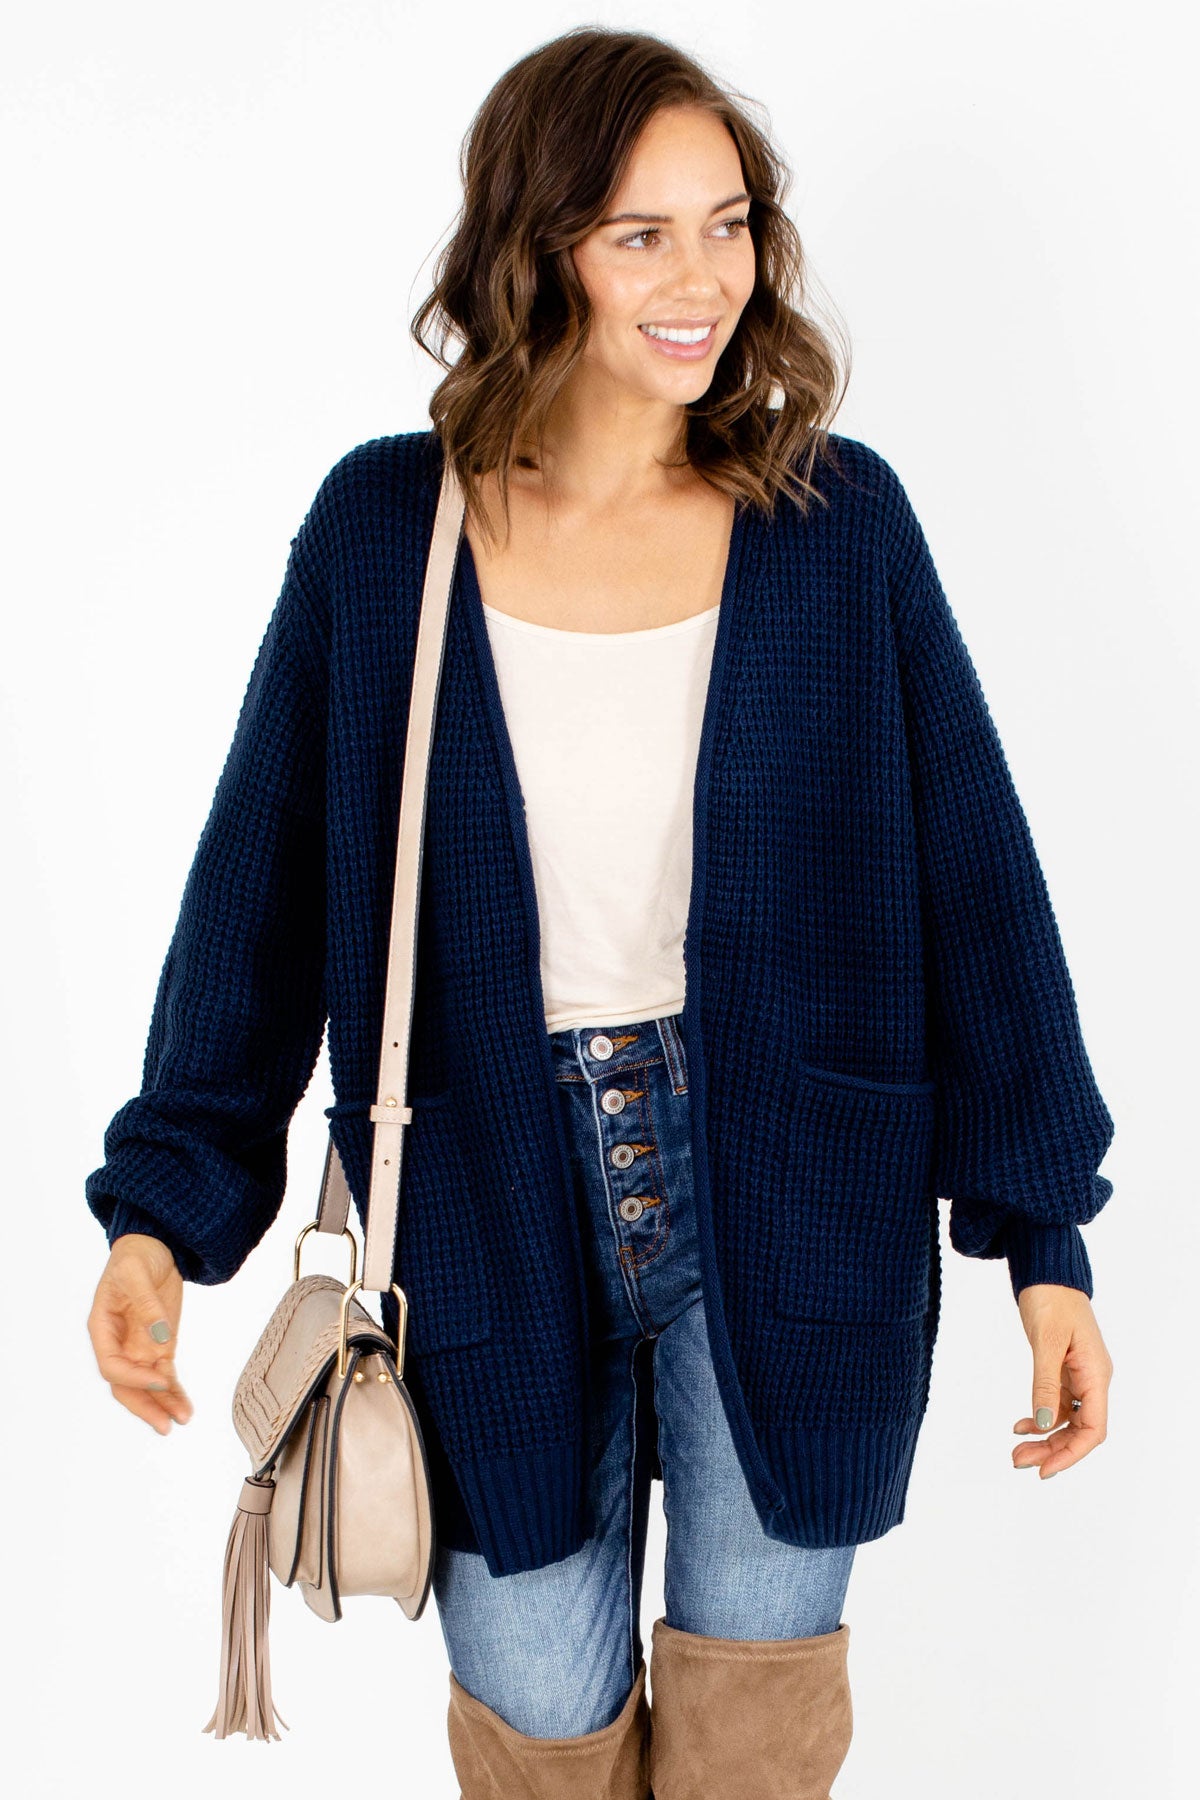 Navy Blue Warm and Cozy Boutique Cardigans for Women